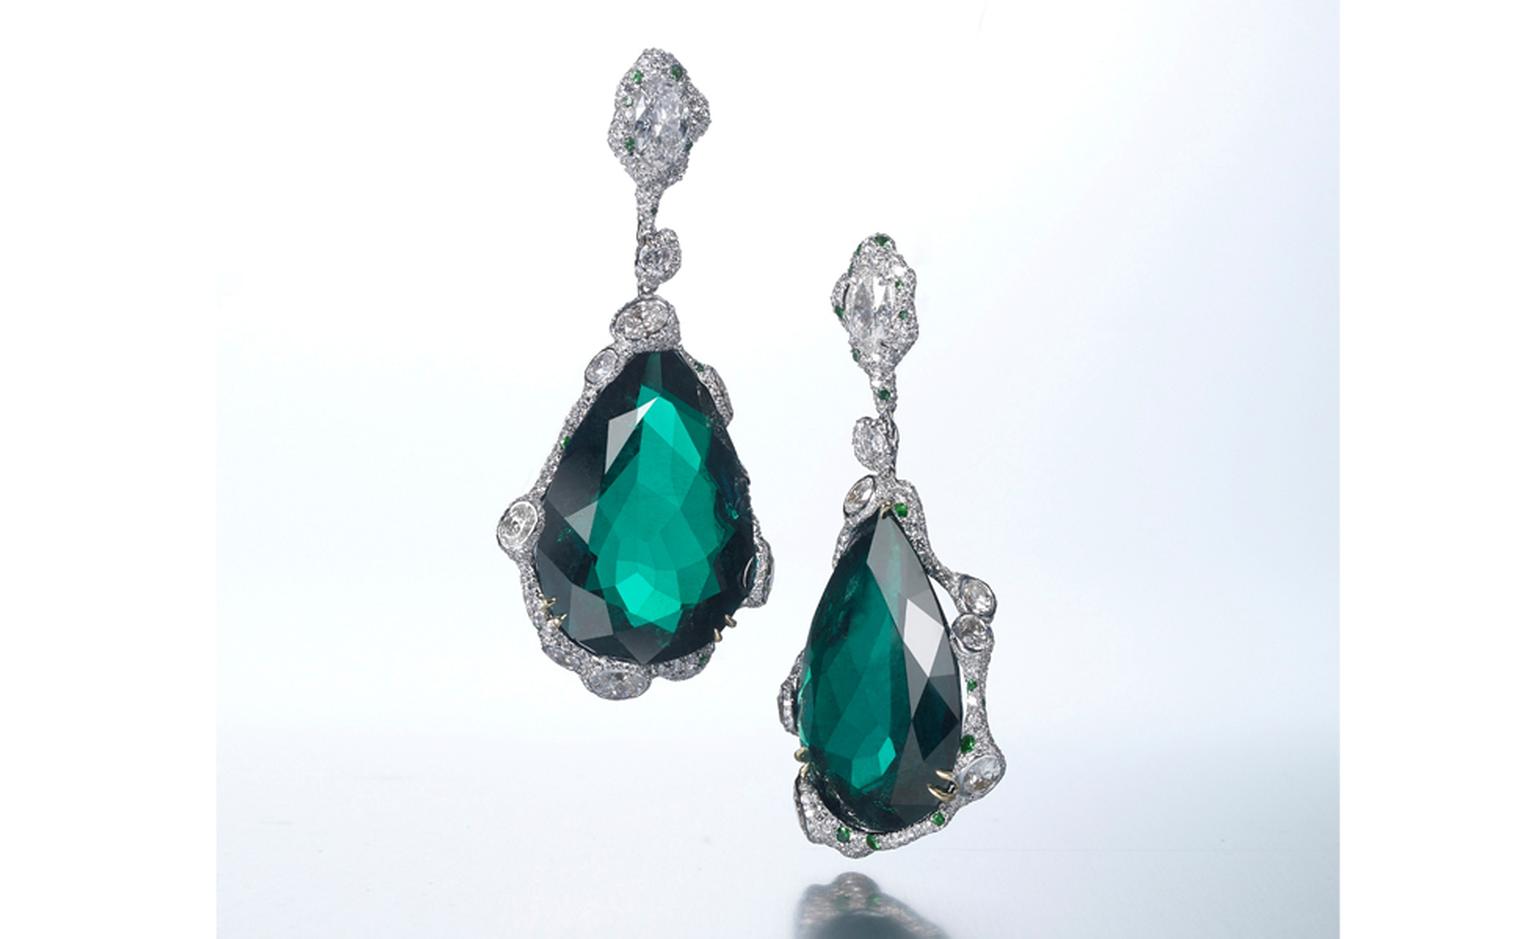 CINDY CHAO, The Art Jewel, Black Label Masterpiece Emerald Drop EarringsDrop earrings with emerald (63cts) highlighted by diamonds set in 18kt white gold. From ?1,025,200